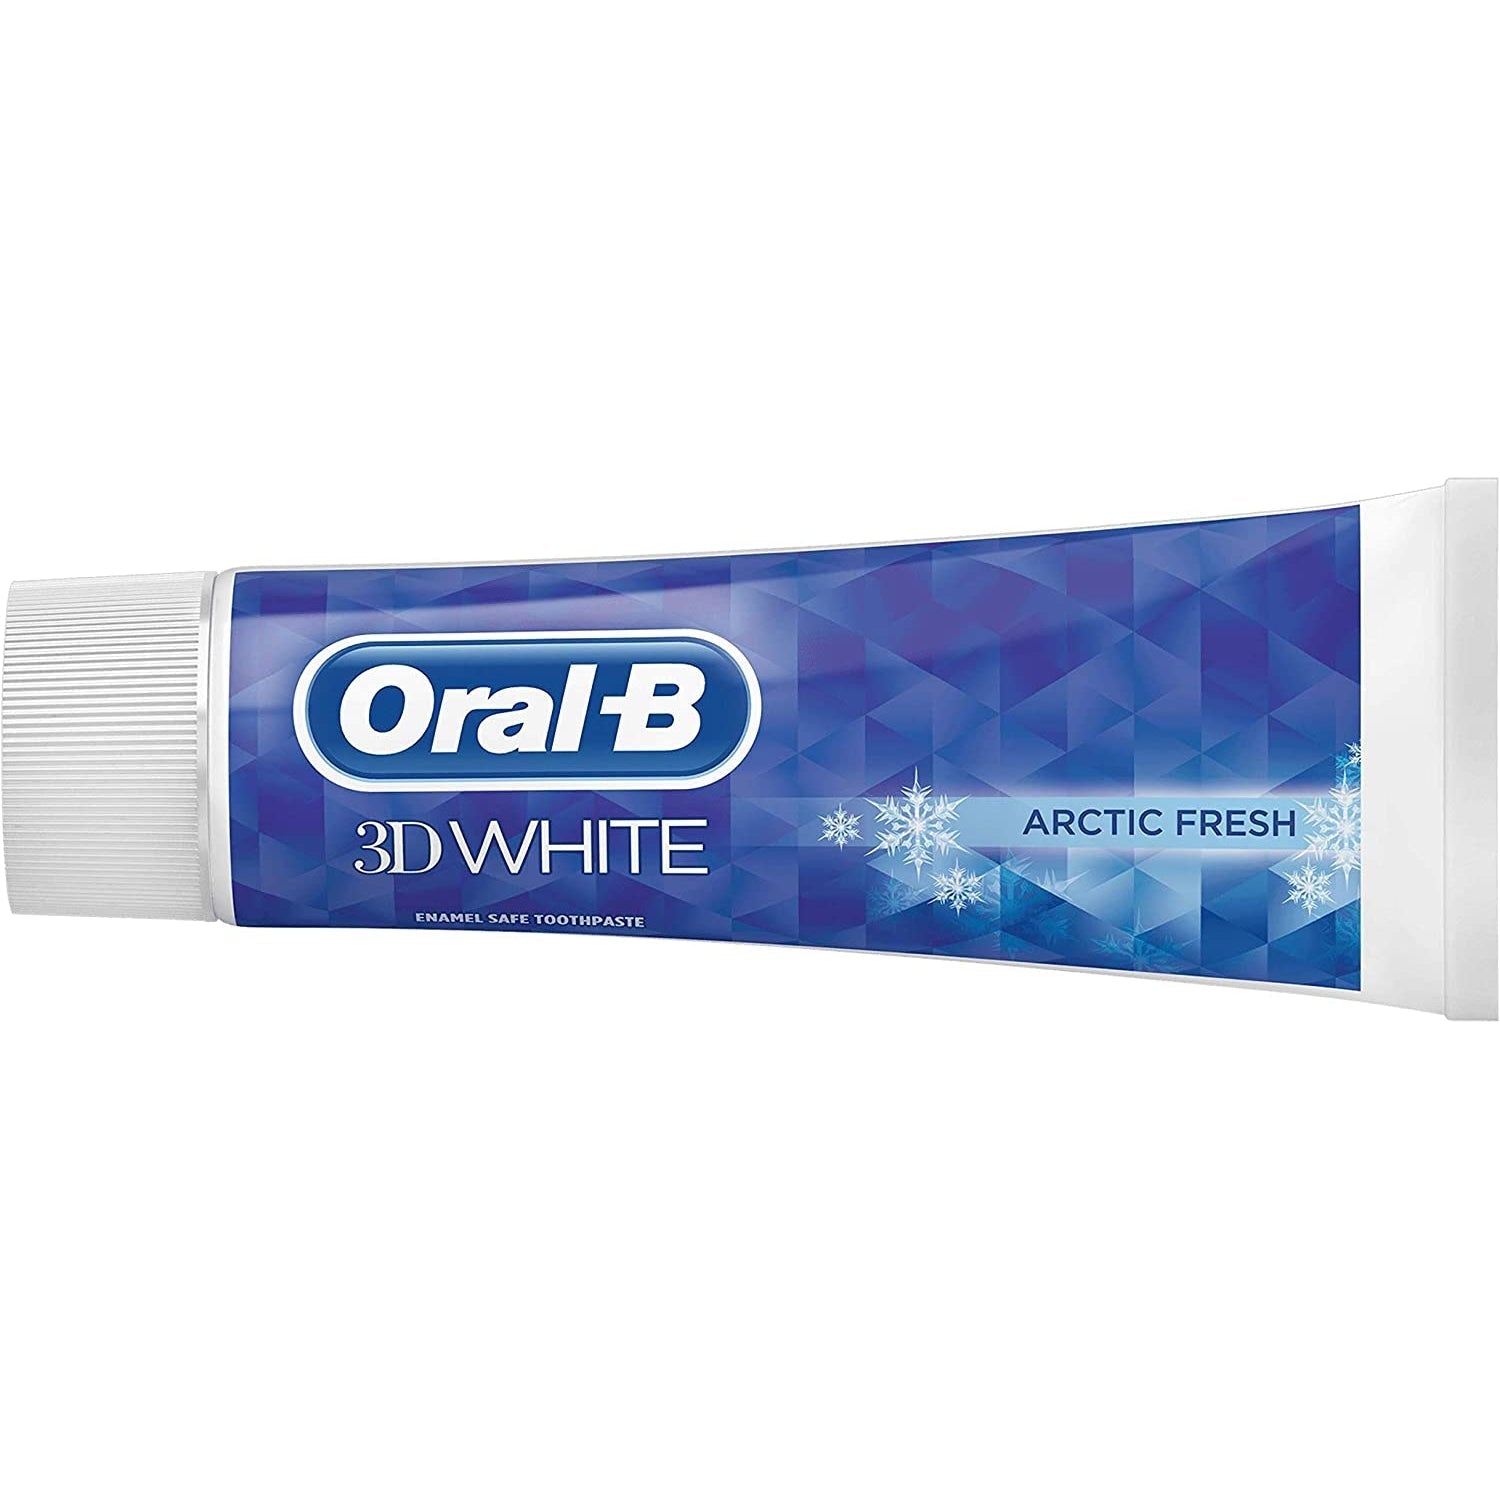 Oral-B 3D White Toothpaste, Arctic Fresh, 75ml - Clinically Proven - Healthxpress.ie